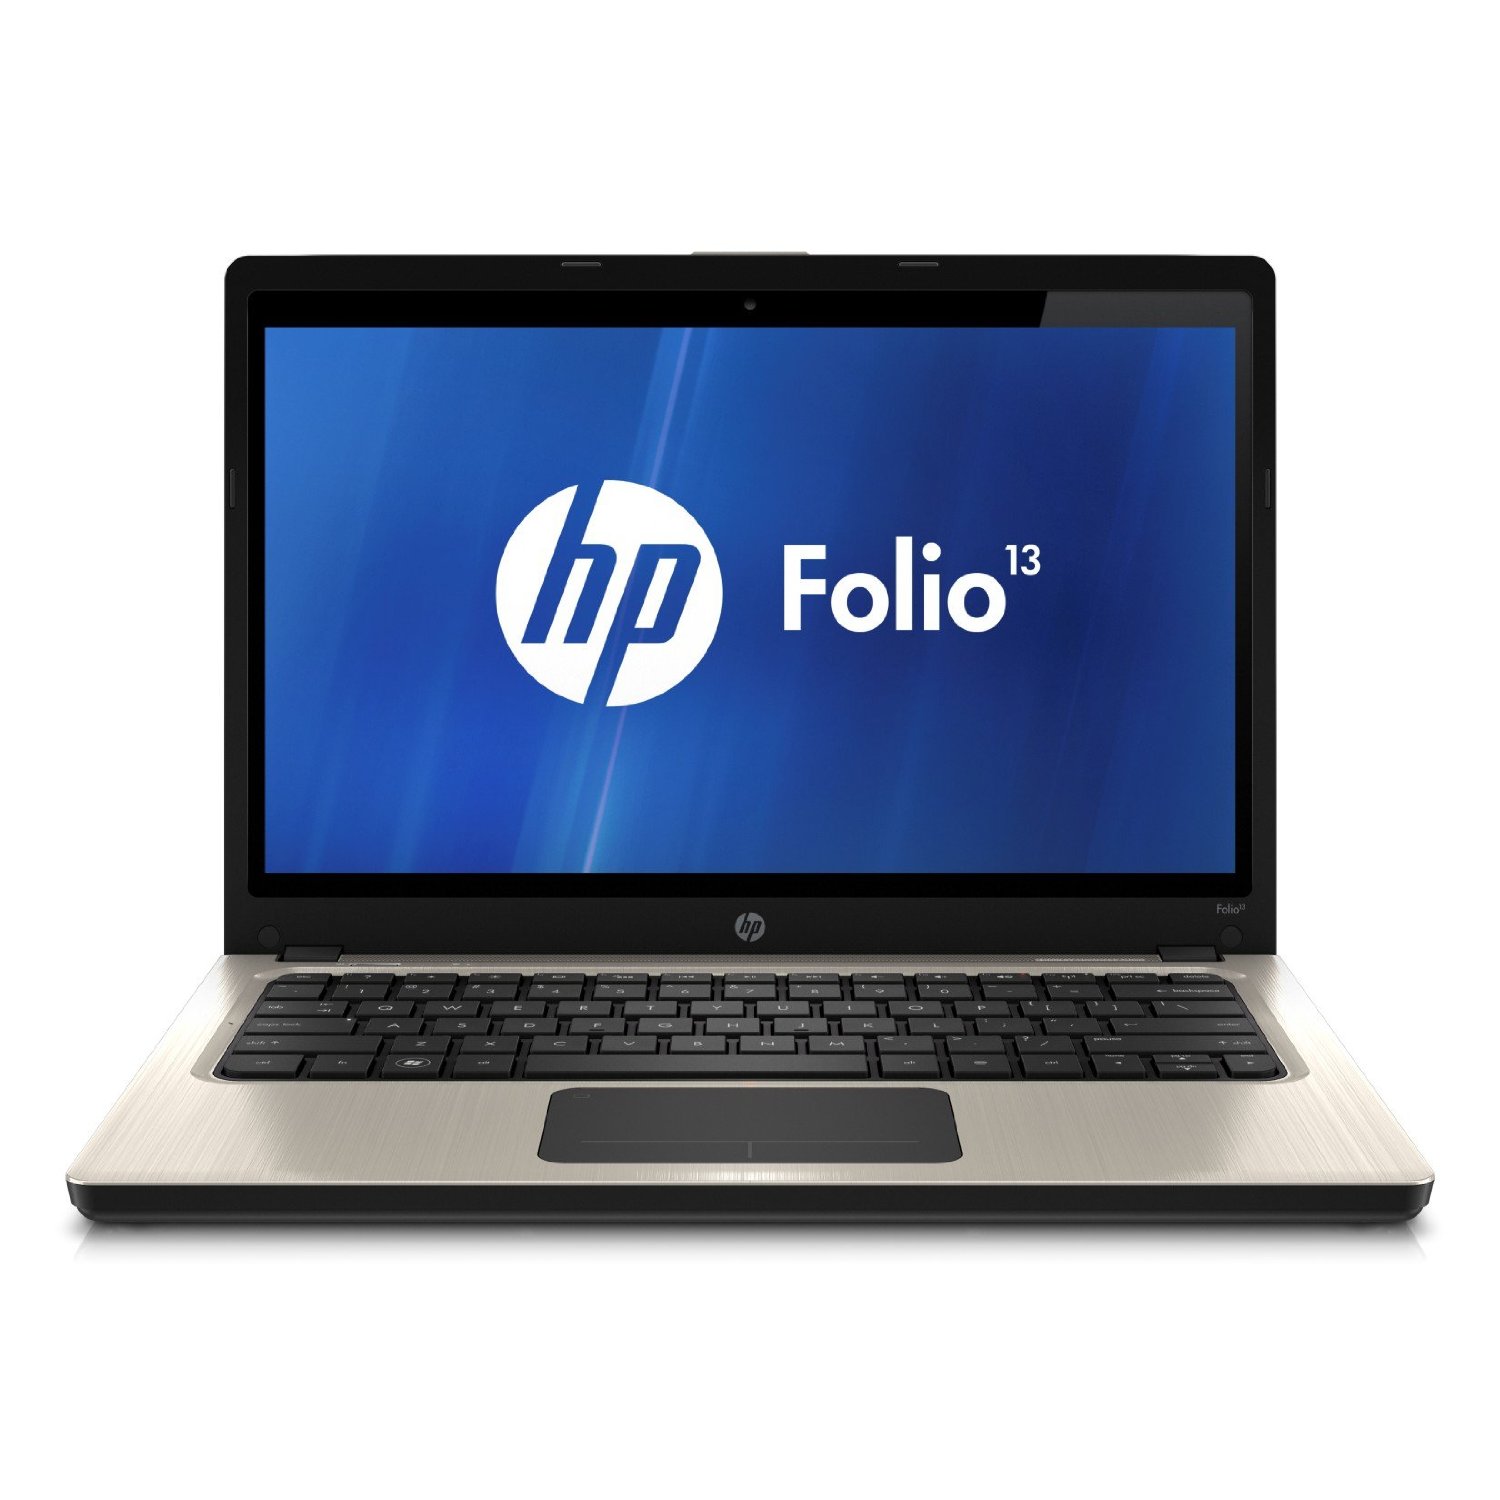 http://thetechjournal.com/wp-content/uploads/images/1201/1327849265-hp-folio-131020us-133inch-laptop-1.jpg